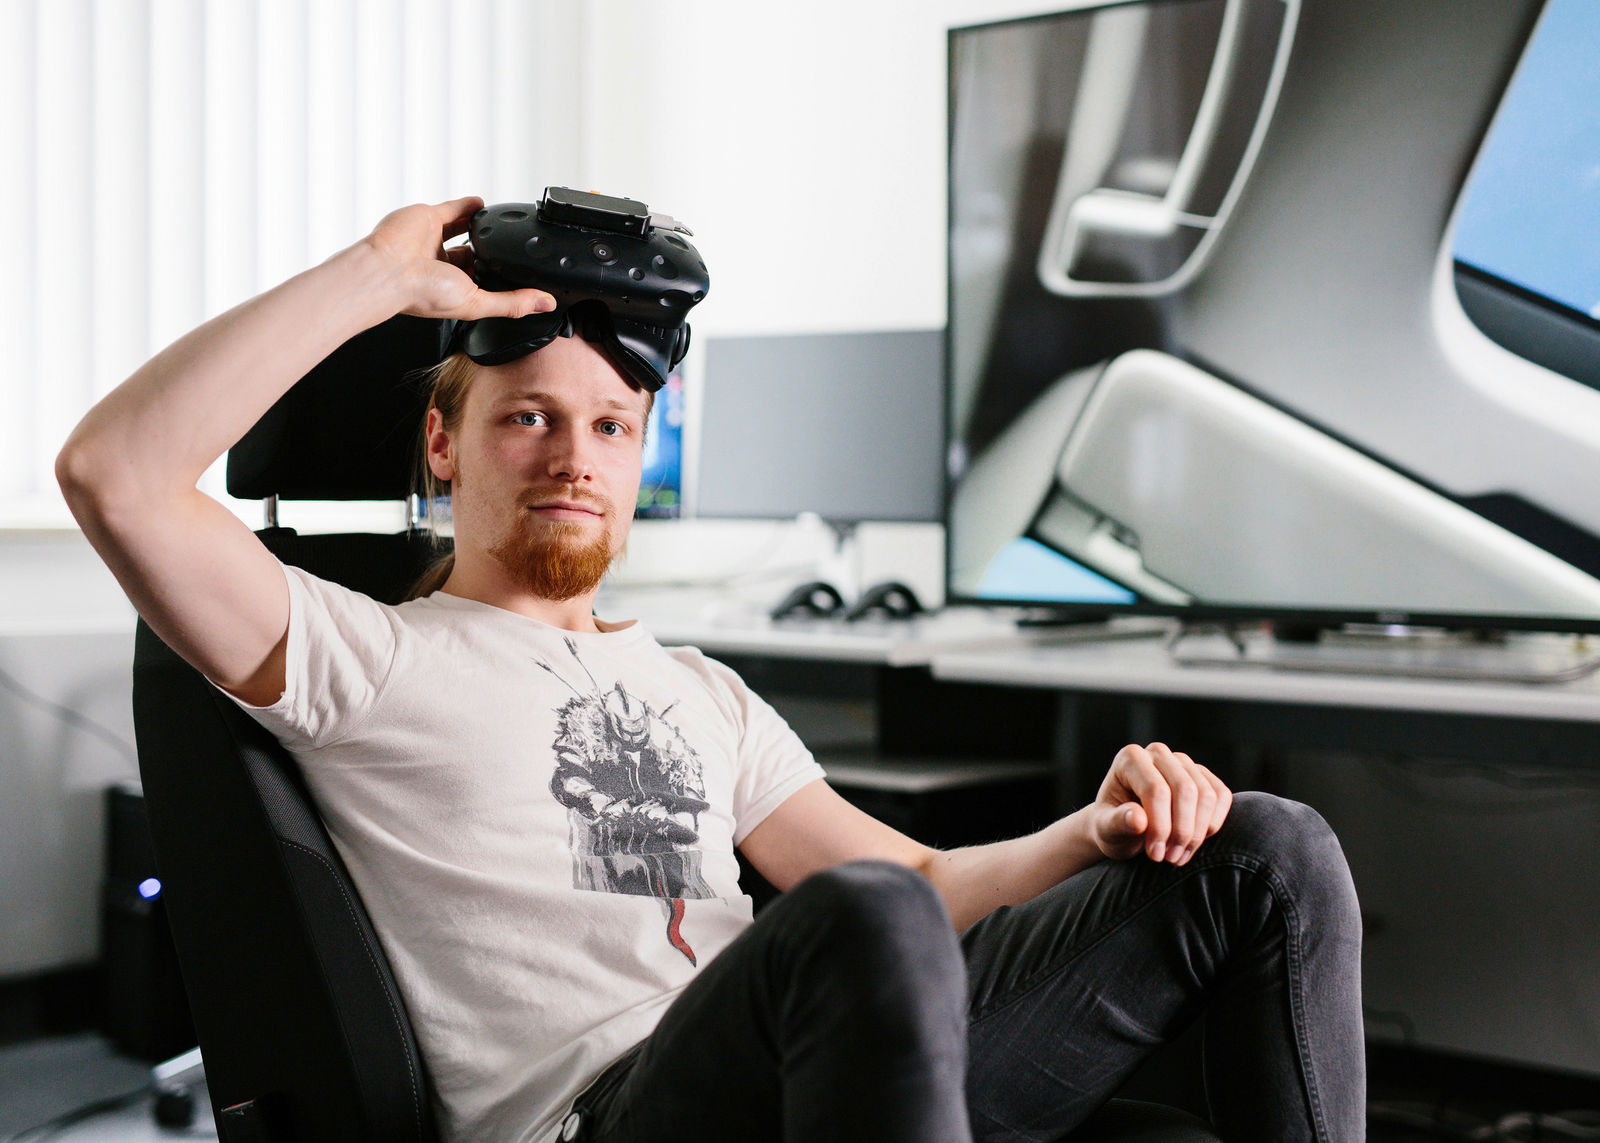 What does a … VR-Developer actually do at Volkswagen?